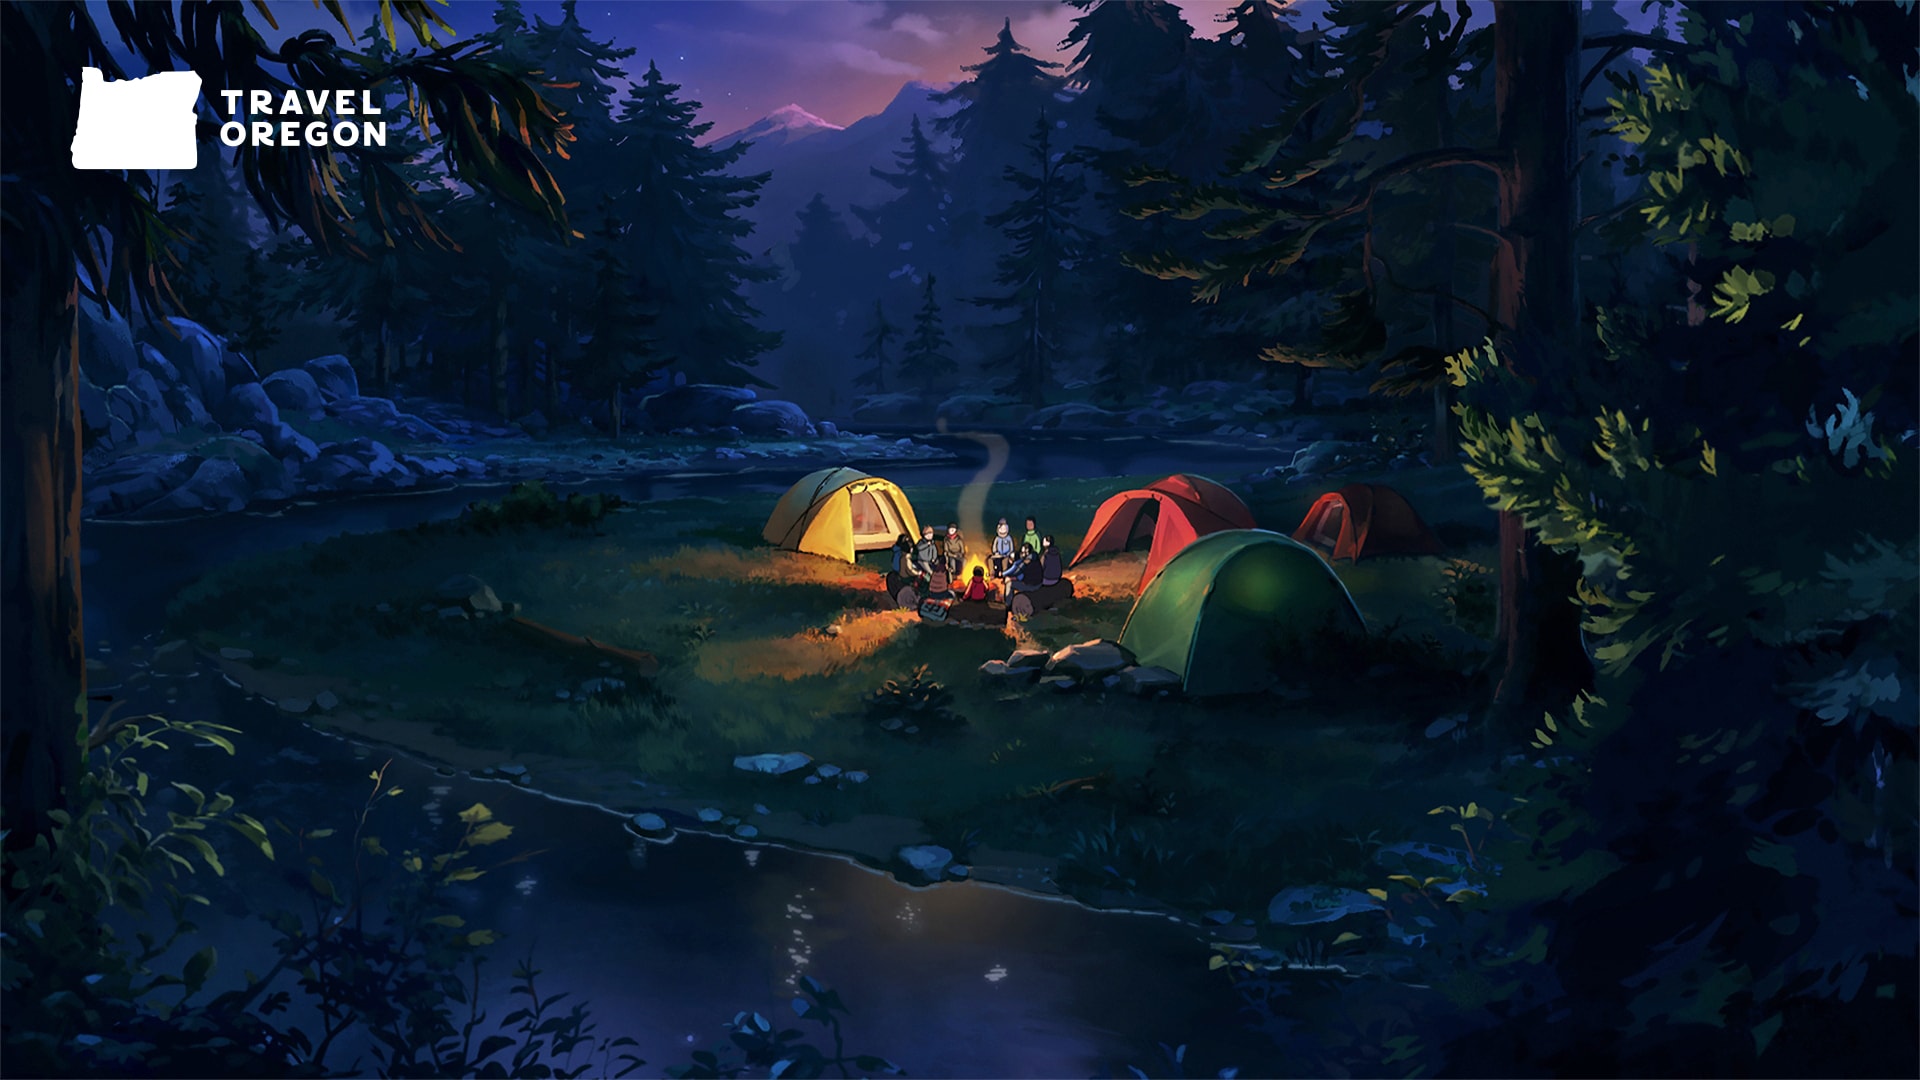 Illustration of colorful tents encircling a campfire at night.